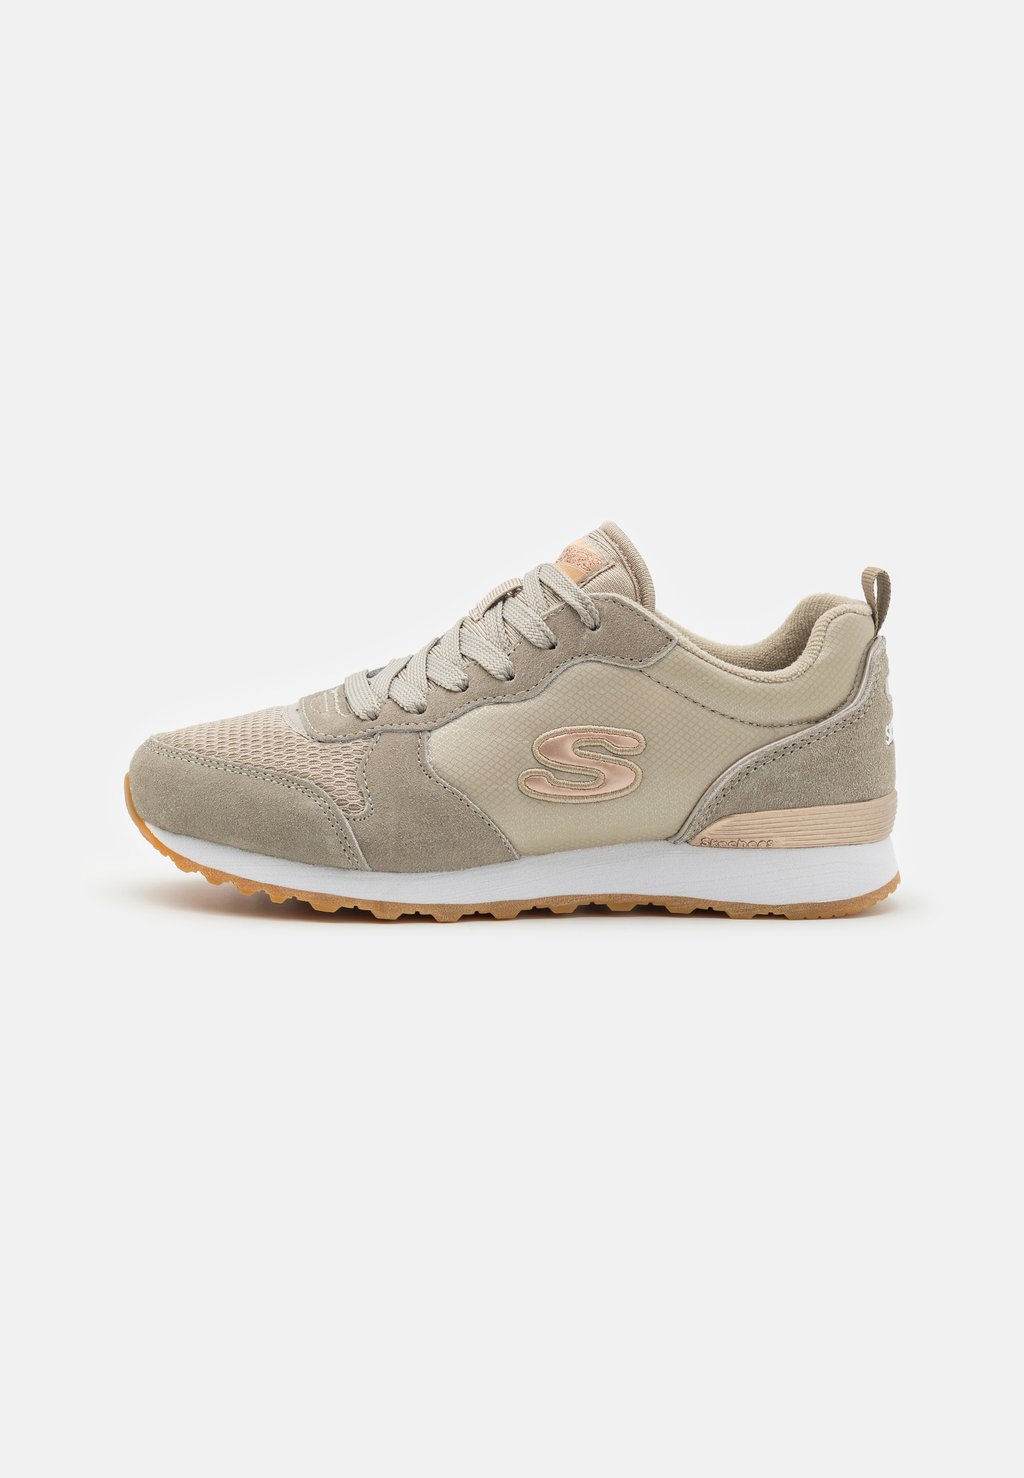 Низкие кроссовки Og 85 Skechers Wide Fit, цвет taupe/rose gold кроссовки skechers sport ultra flex taupe gold offwhite